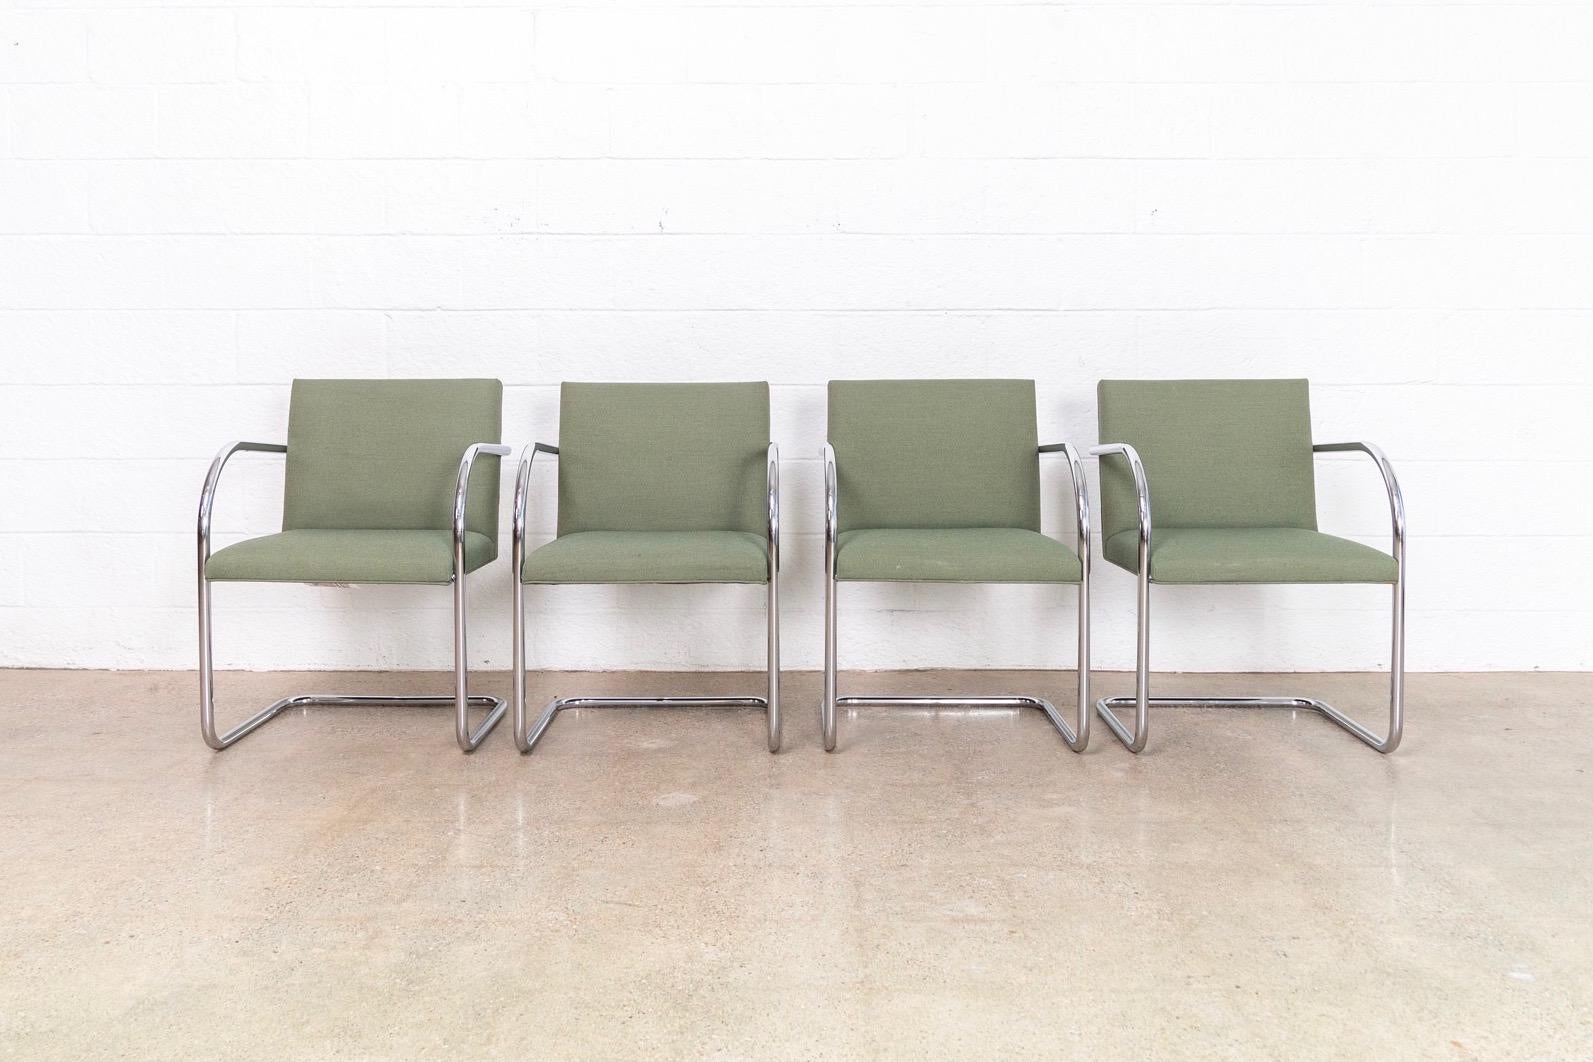 This set of four Mies van der Rohe Brno armchairs made by Gordon International are circa 1990. These iconic Mid-Century Modern chairs designed by Mies van der Rohe in 1930 feature clean lines and a simple profile. Model 504 has a cantilevered frame